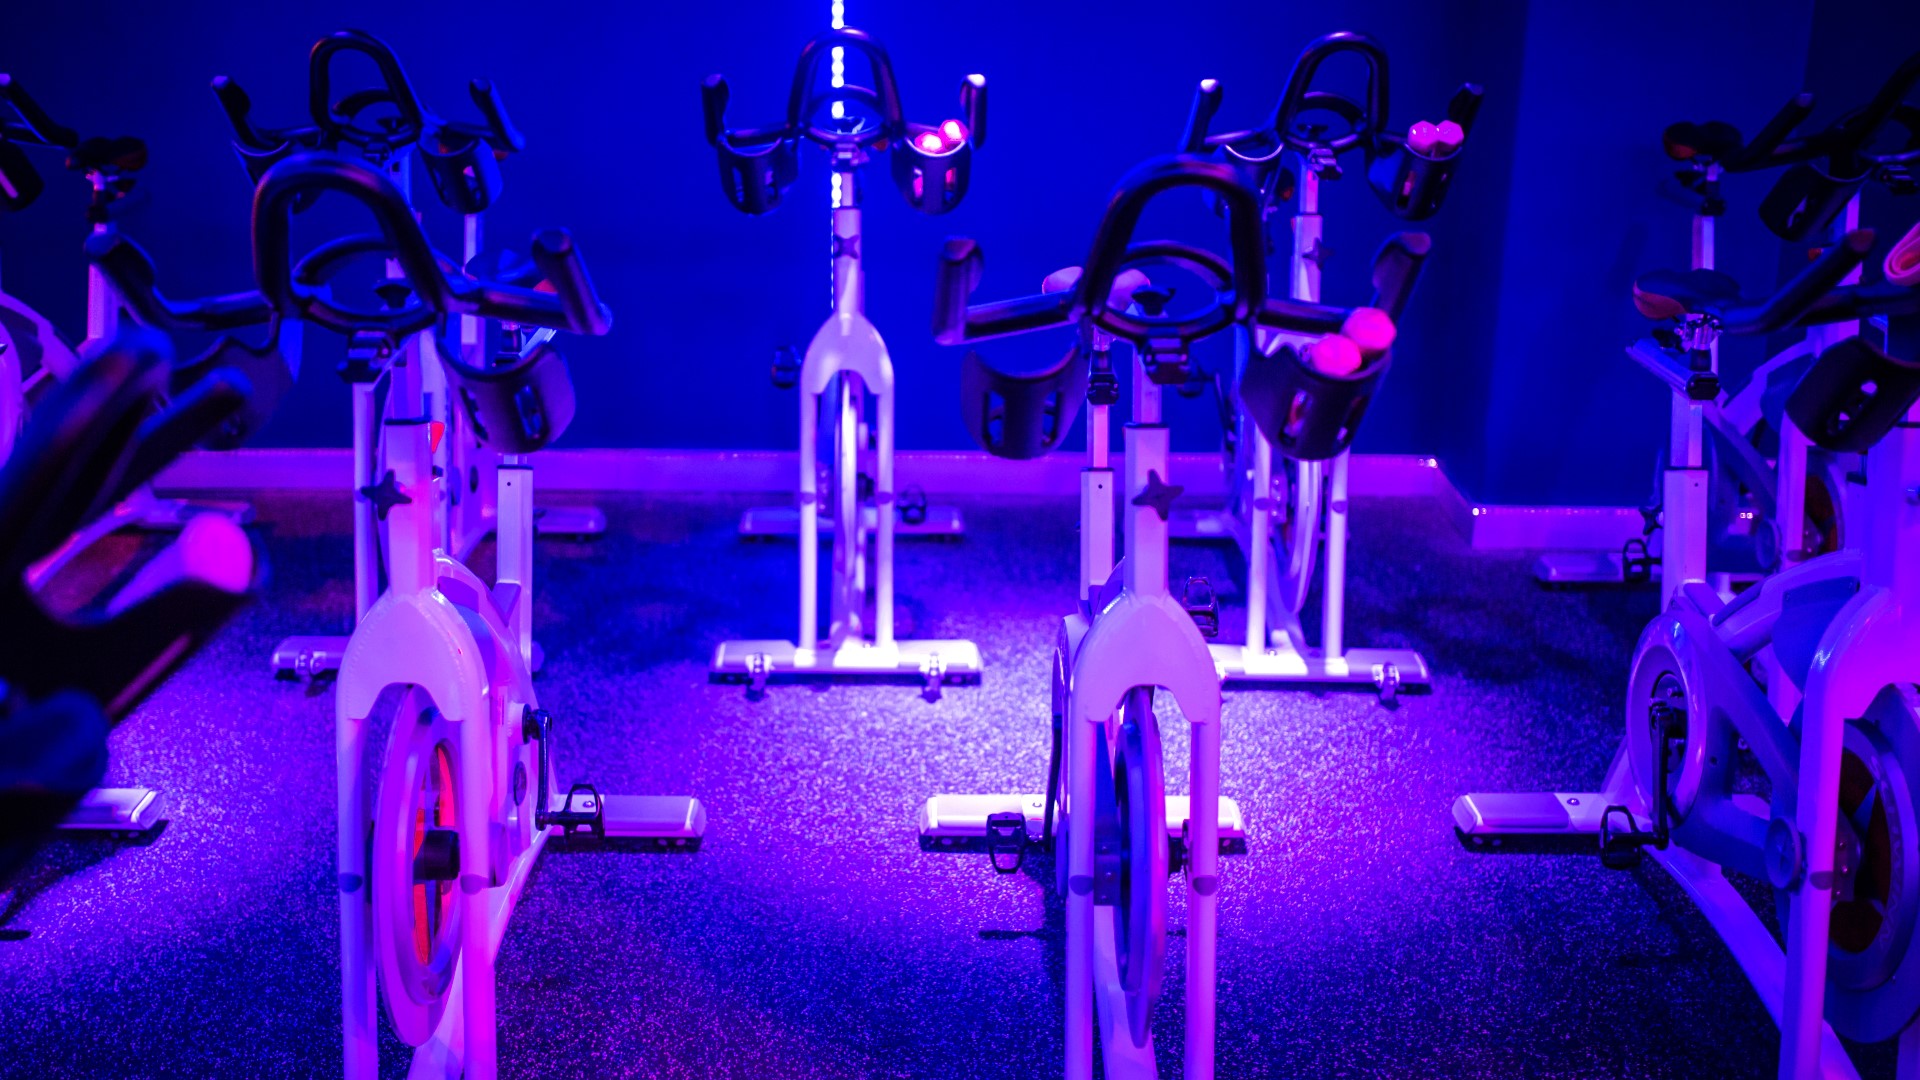 CycleBar DC offers classes for beginners and advanced cyclers. Instructors Jacie Coressel and Kelli Coffman demonstrate how to properly ride a bike.